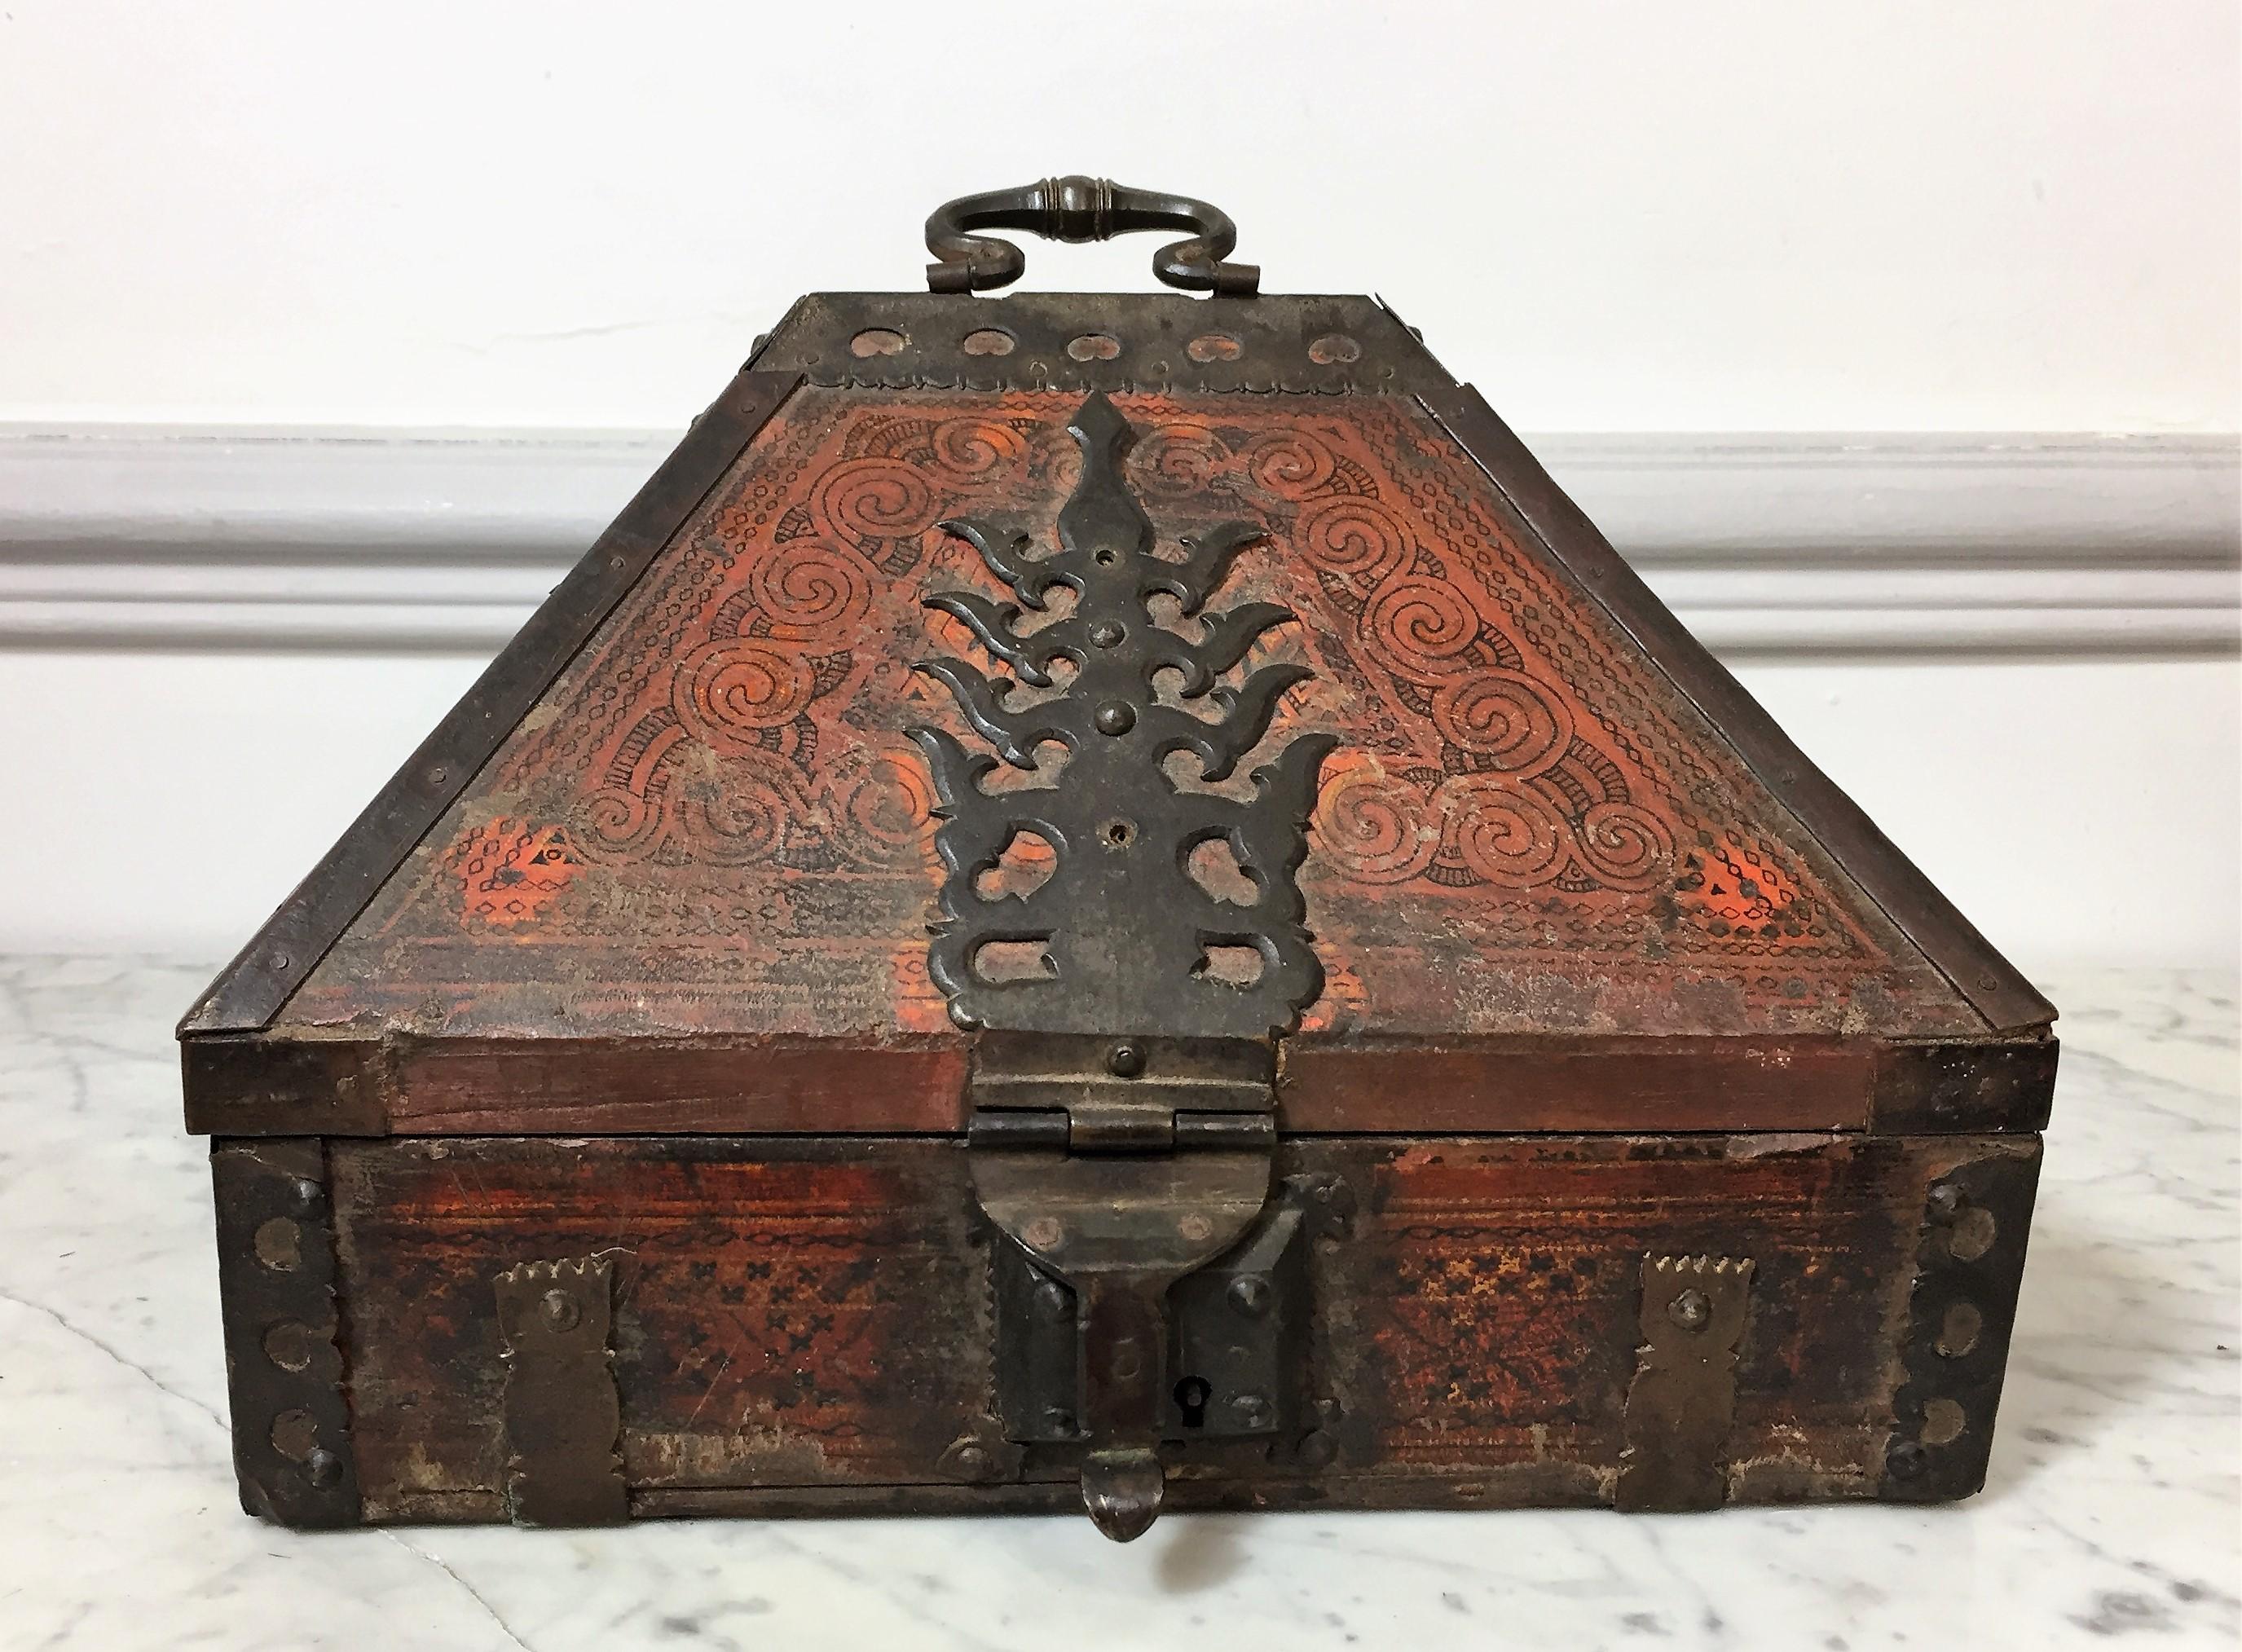 This beautiful travel chest is Indo-Portuguese from the 19th century. The lid is pyramid shaped and the bronze hardware on top is in the form of a stylized flame. The wood is painted with arabesque and geometric patterns. Inside the chest is a